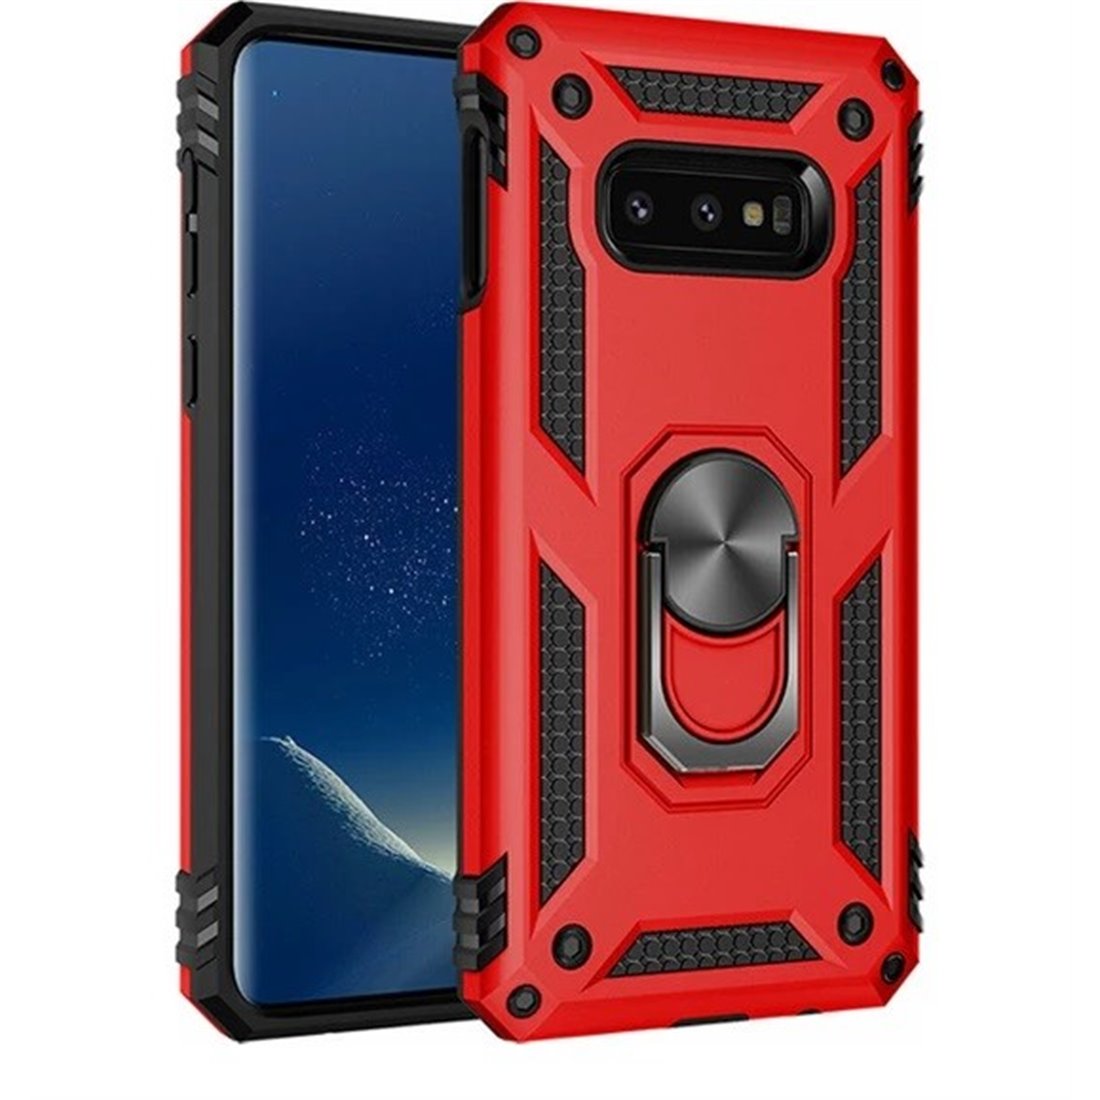 Samsung Galaxy S10E Plastic Red Back Cover - Solid ring